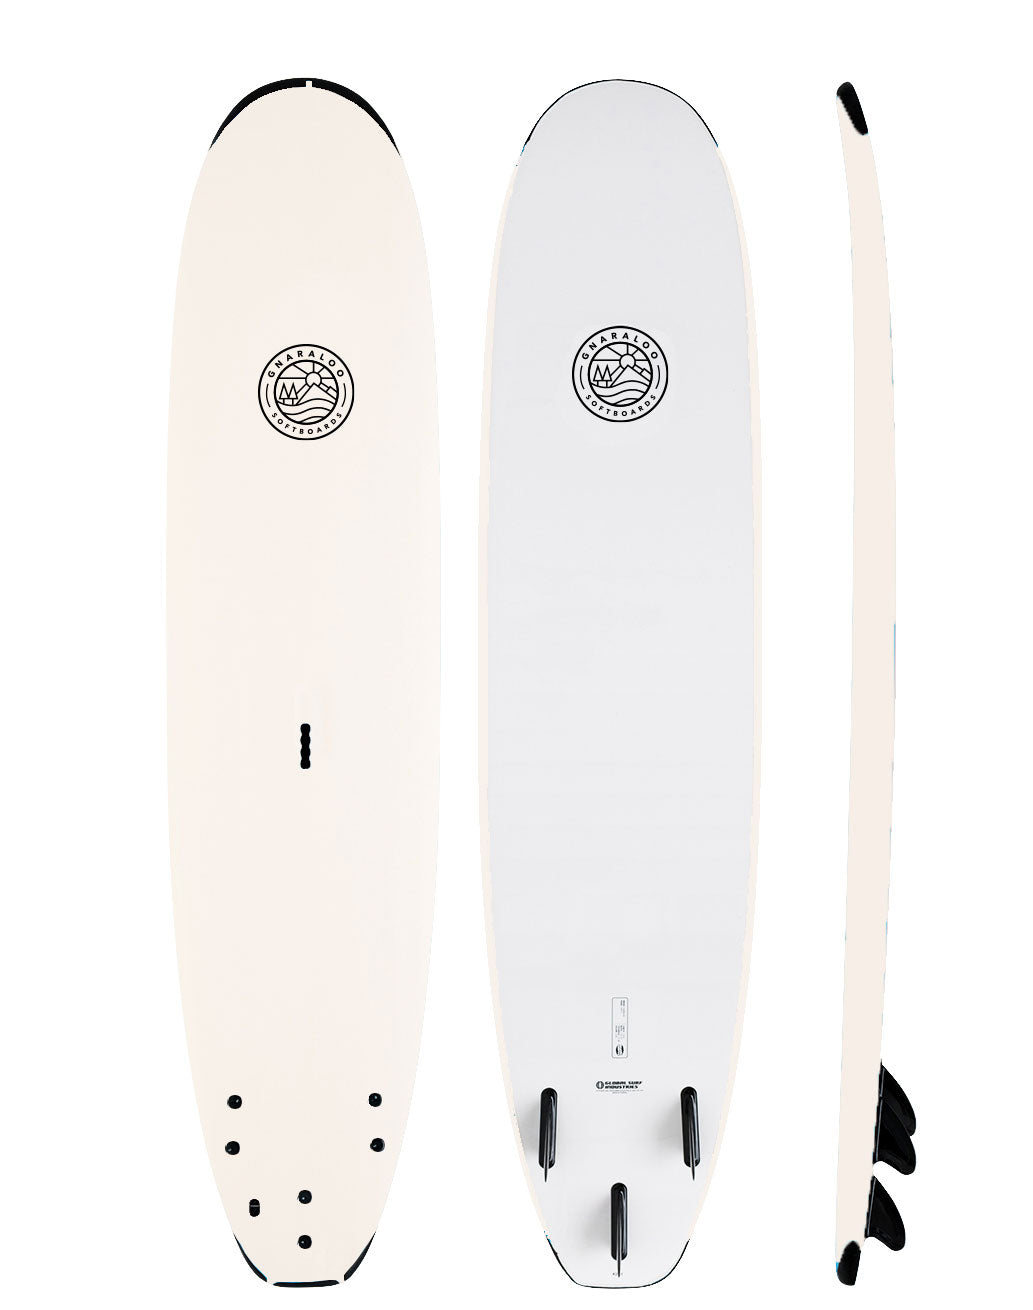 Gnaraloo soft surfboard in white